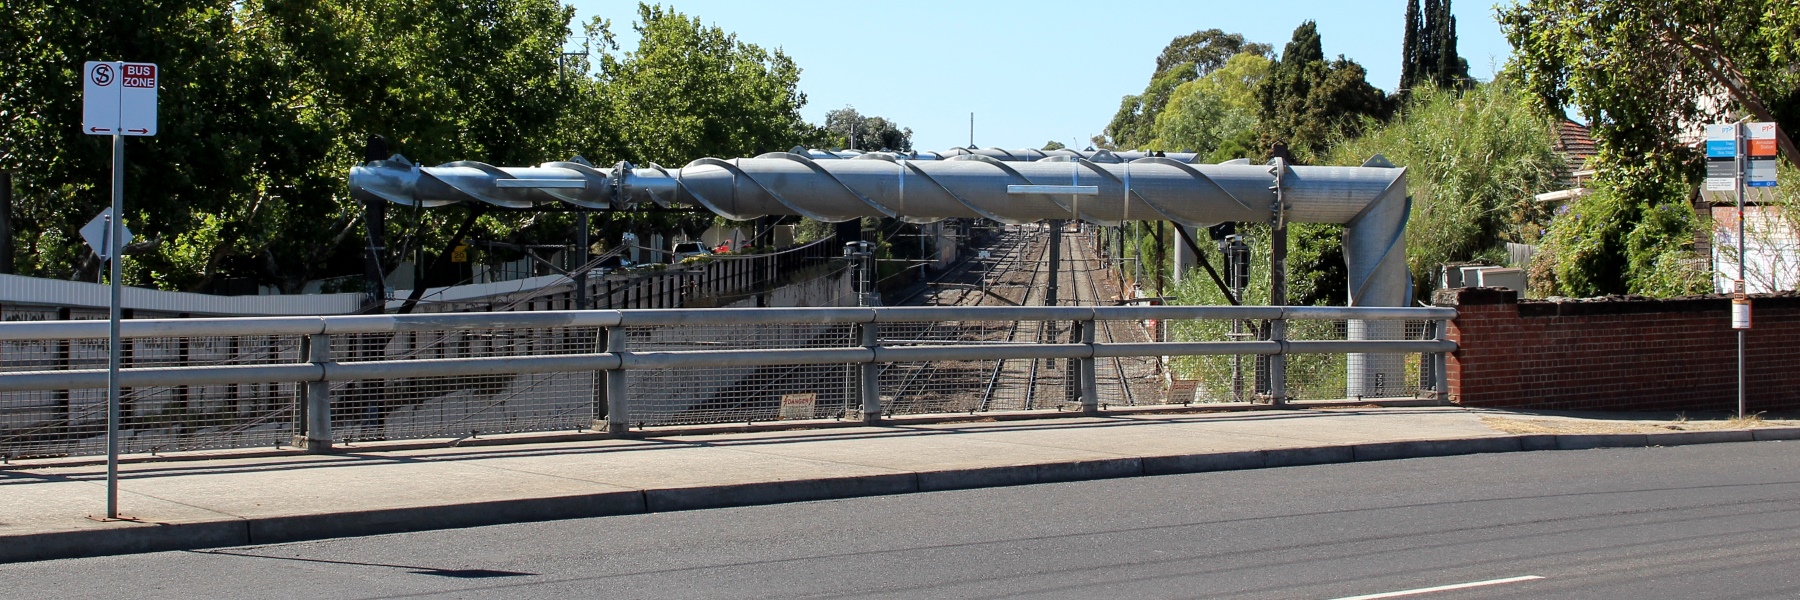 Overhead wire structure near Armadale station